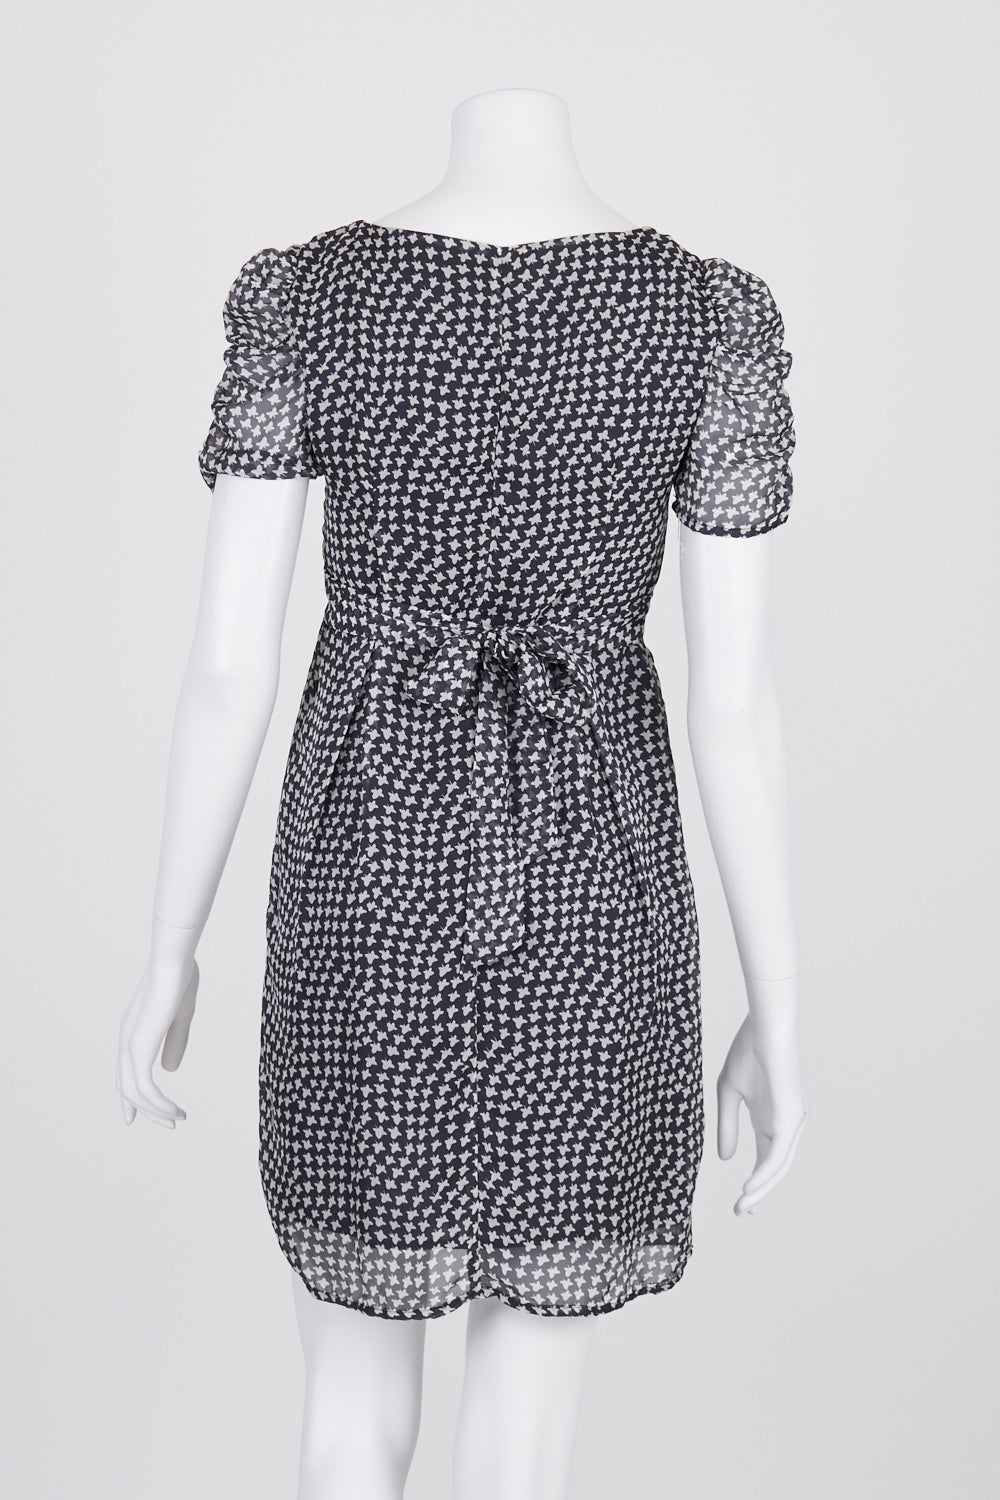 Tokito Black and White Patterned Button Front Dress 8